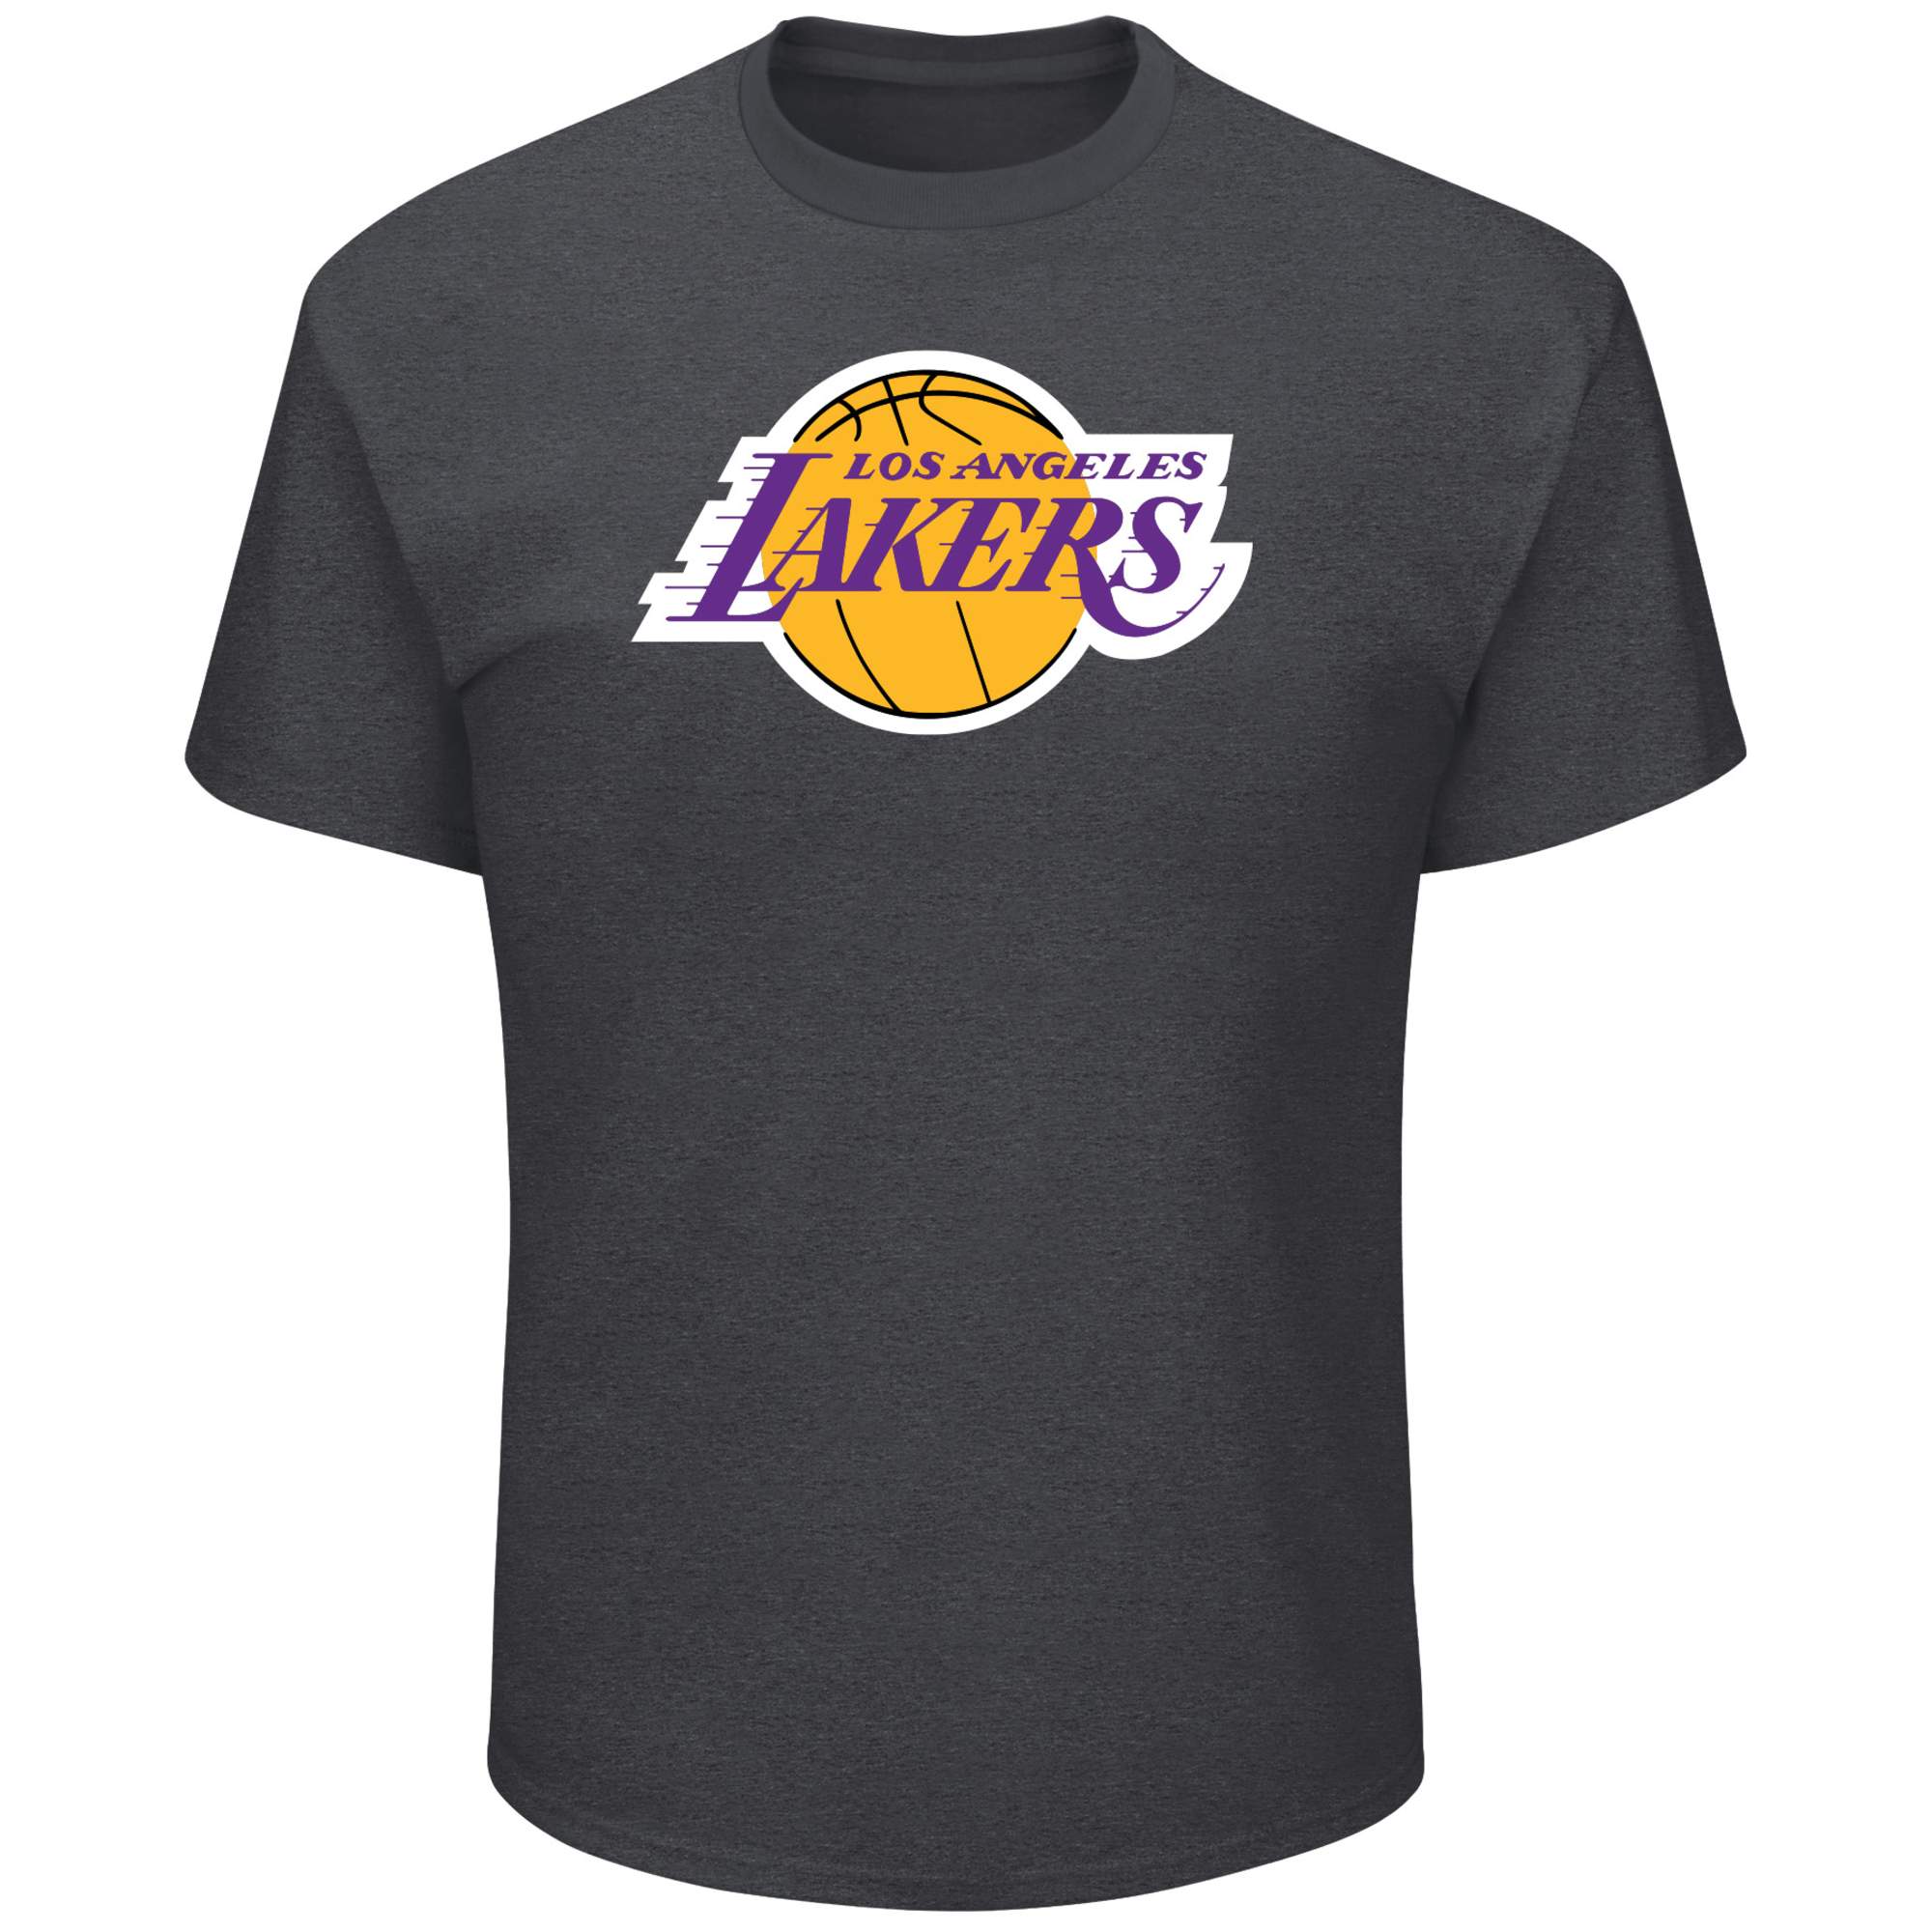 NBA Los Angeles Lakers Victory Century Men's Big and Tall Short Sleeve Tee - image 1 of 1